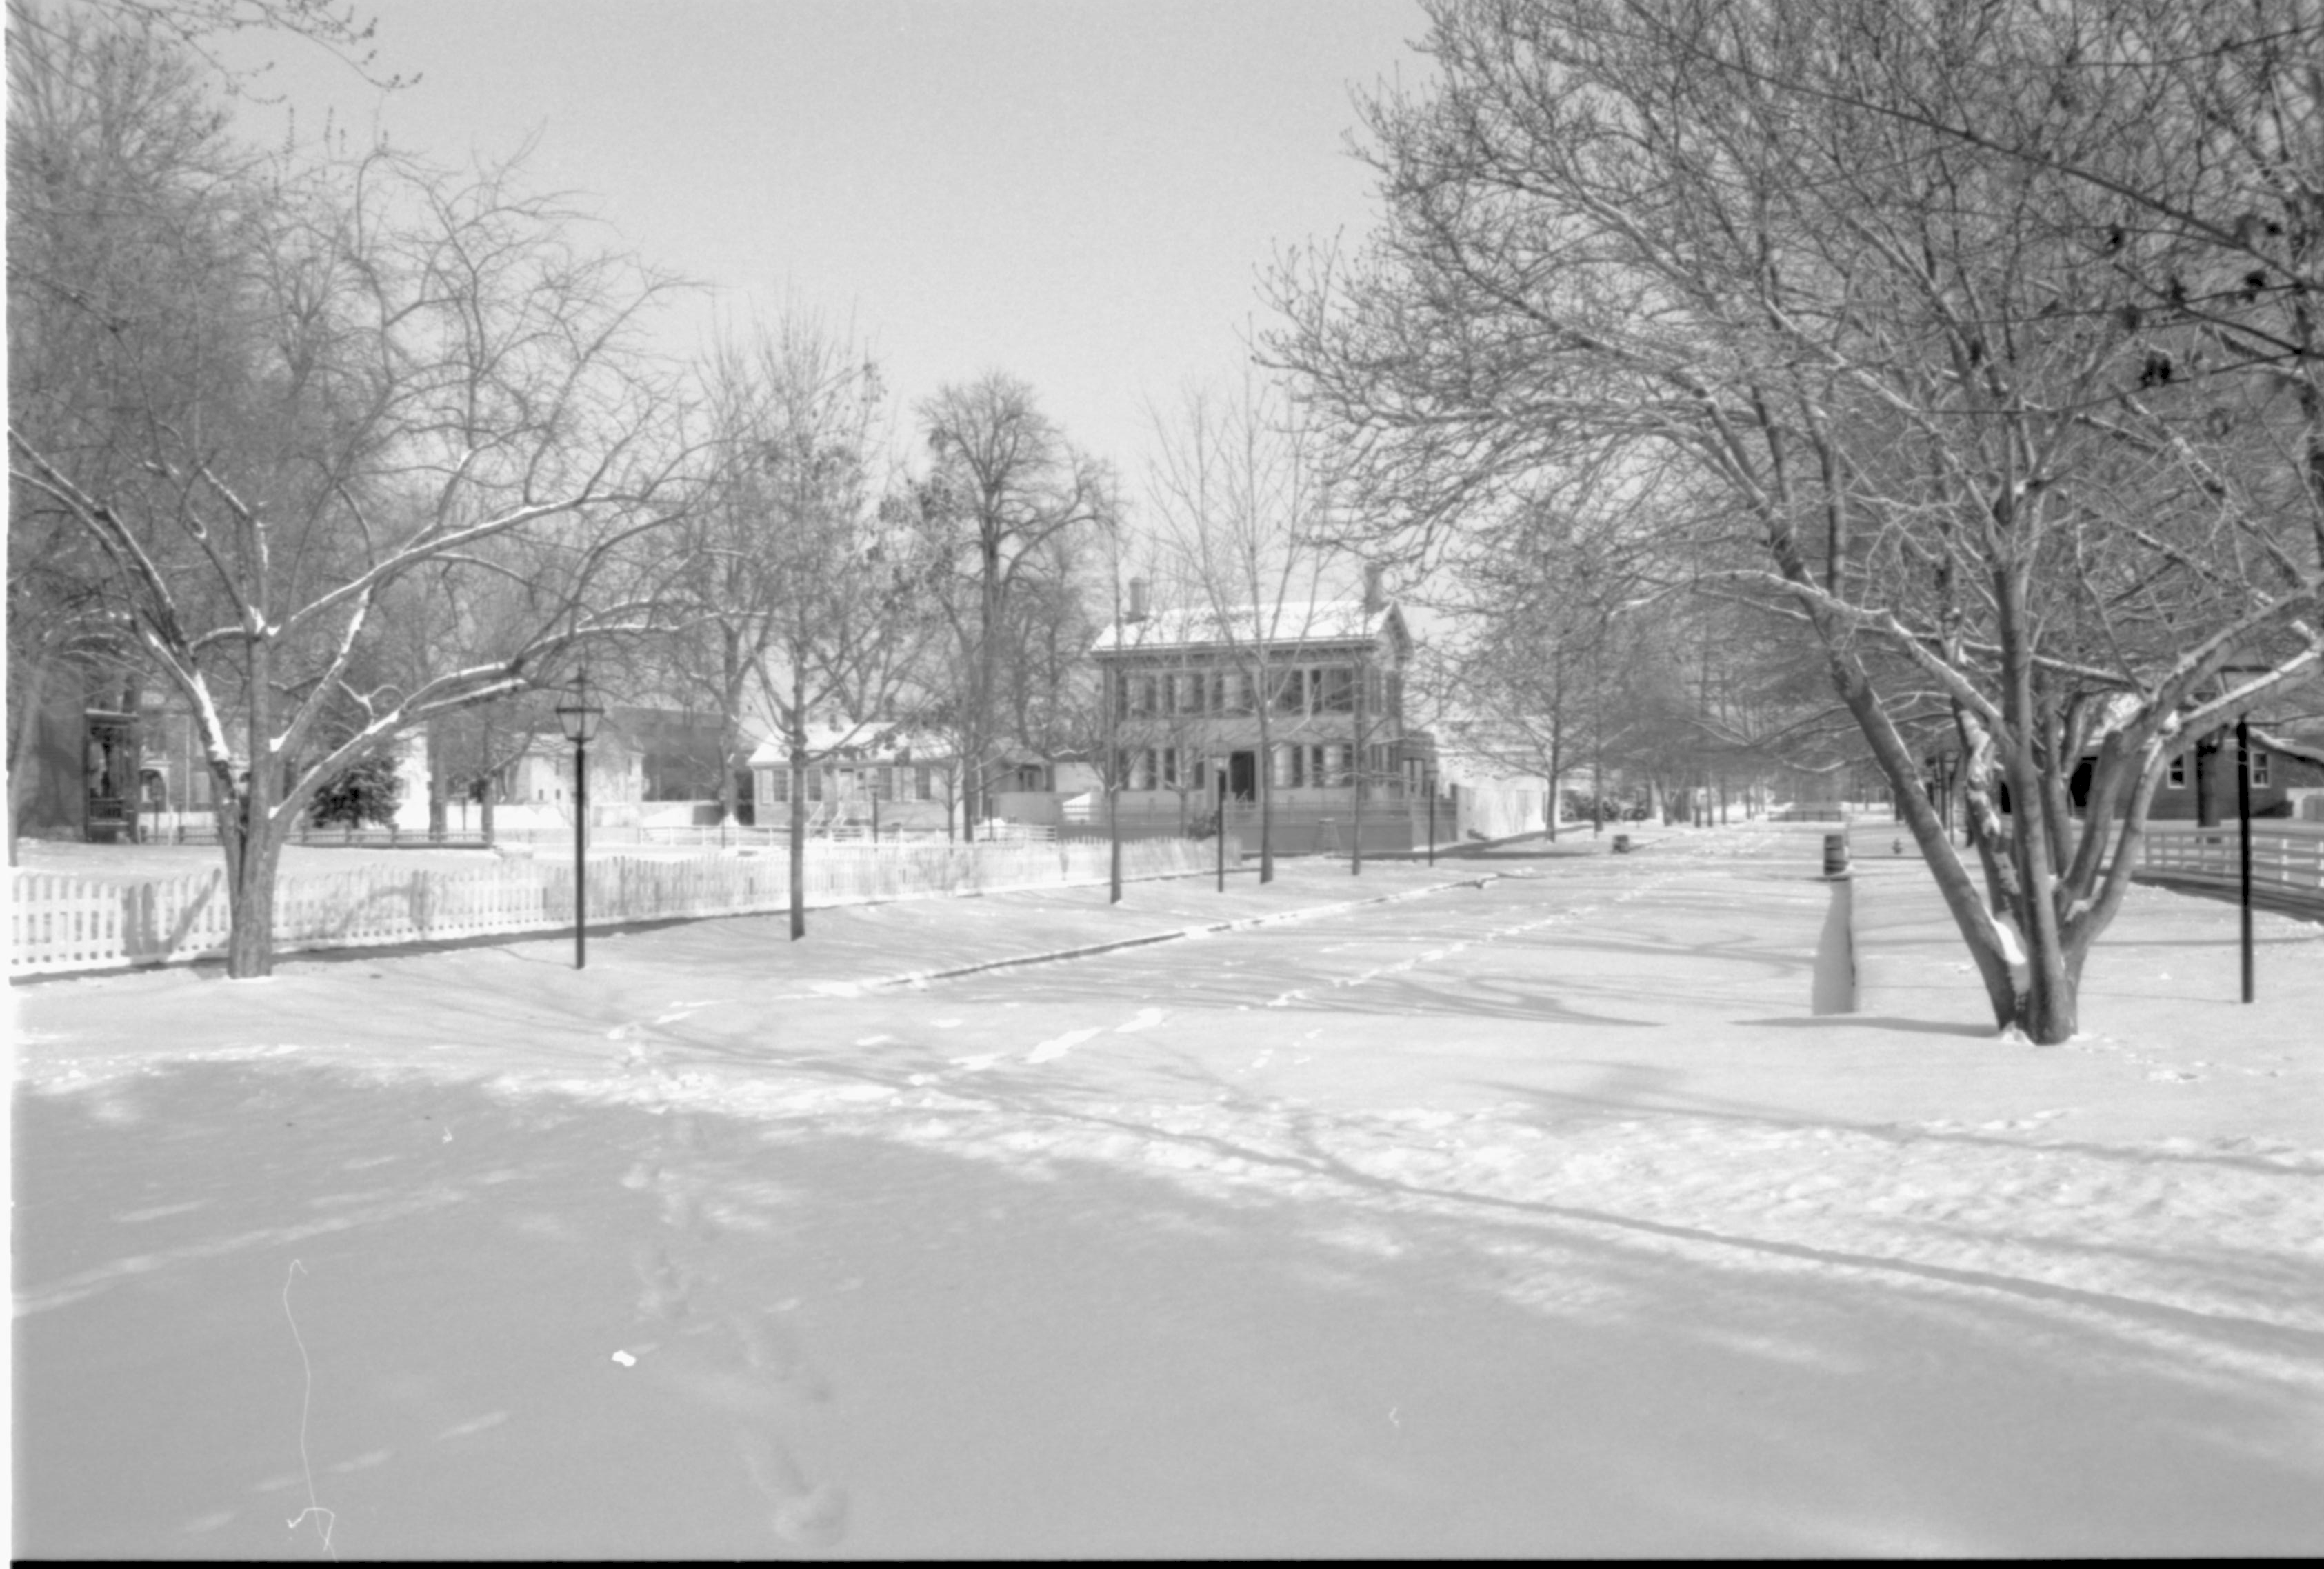 Lincoln neighborhood in the snow.  Lincoln Home in center, Corneau House on left, Morse House in background left, Dean House (dark building) and Conference Center in brick on far left.  Arnold House in background right.  Footprints visible in snow along Jackson Street. Looking Northeast from alley behind Visitor Center at intersection w/Jackson Street snow, Lincoln Home, Dean, Conference Center, Corneau, Arnold, Jackson Street, alley